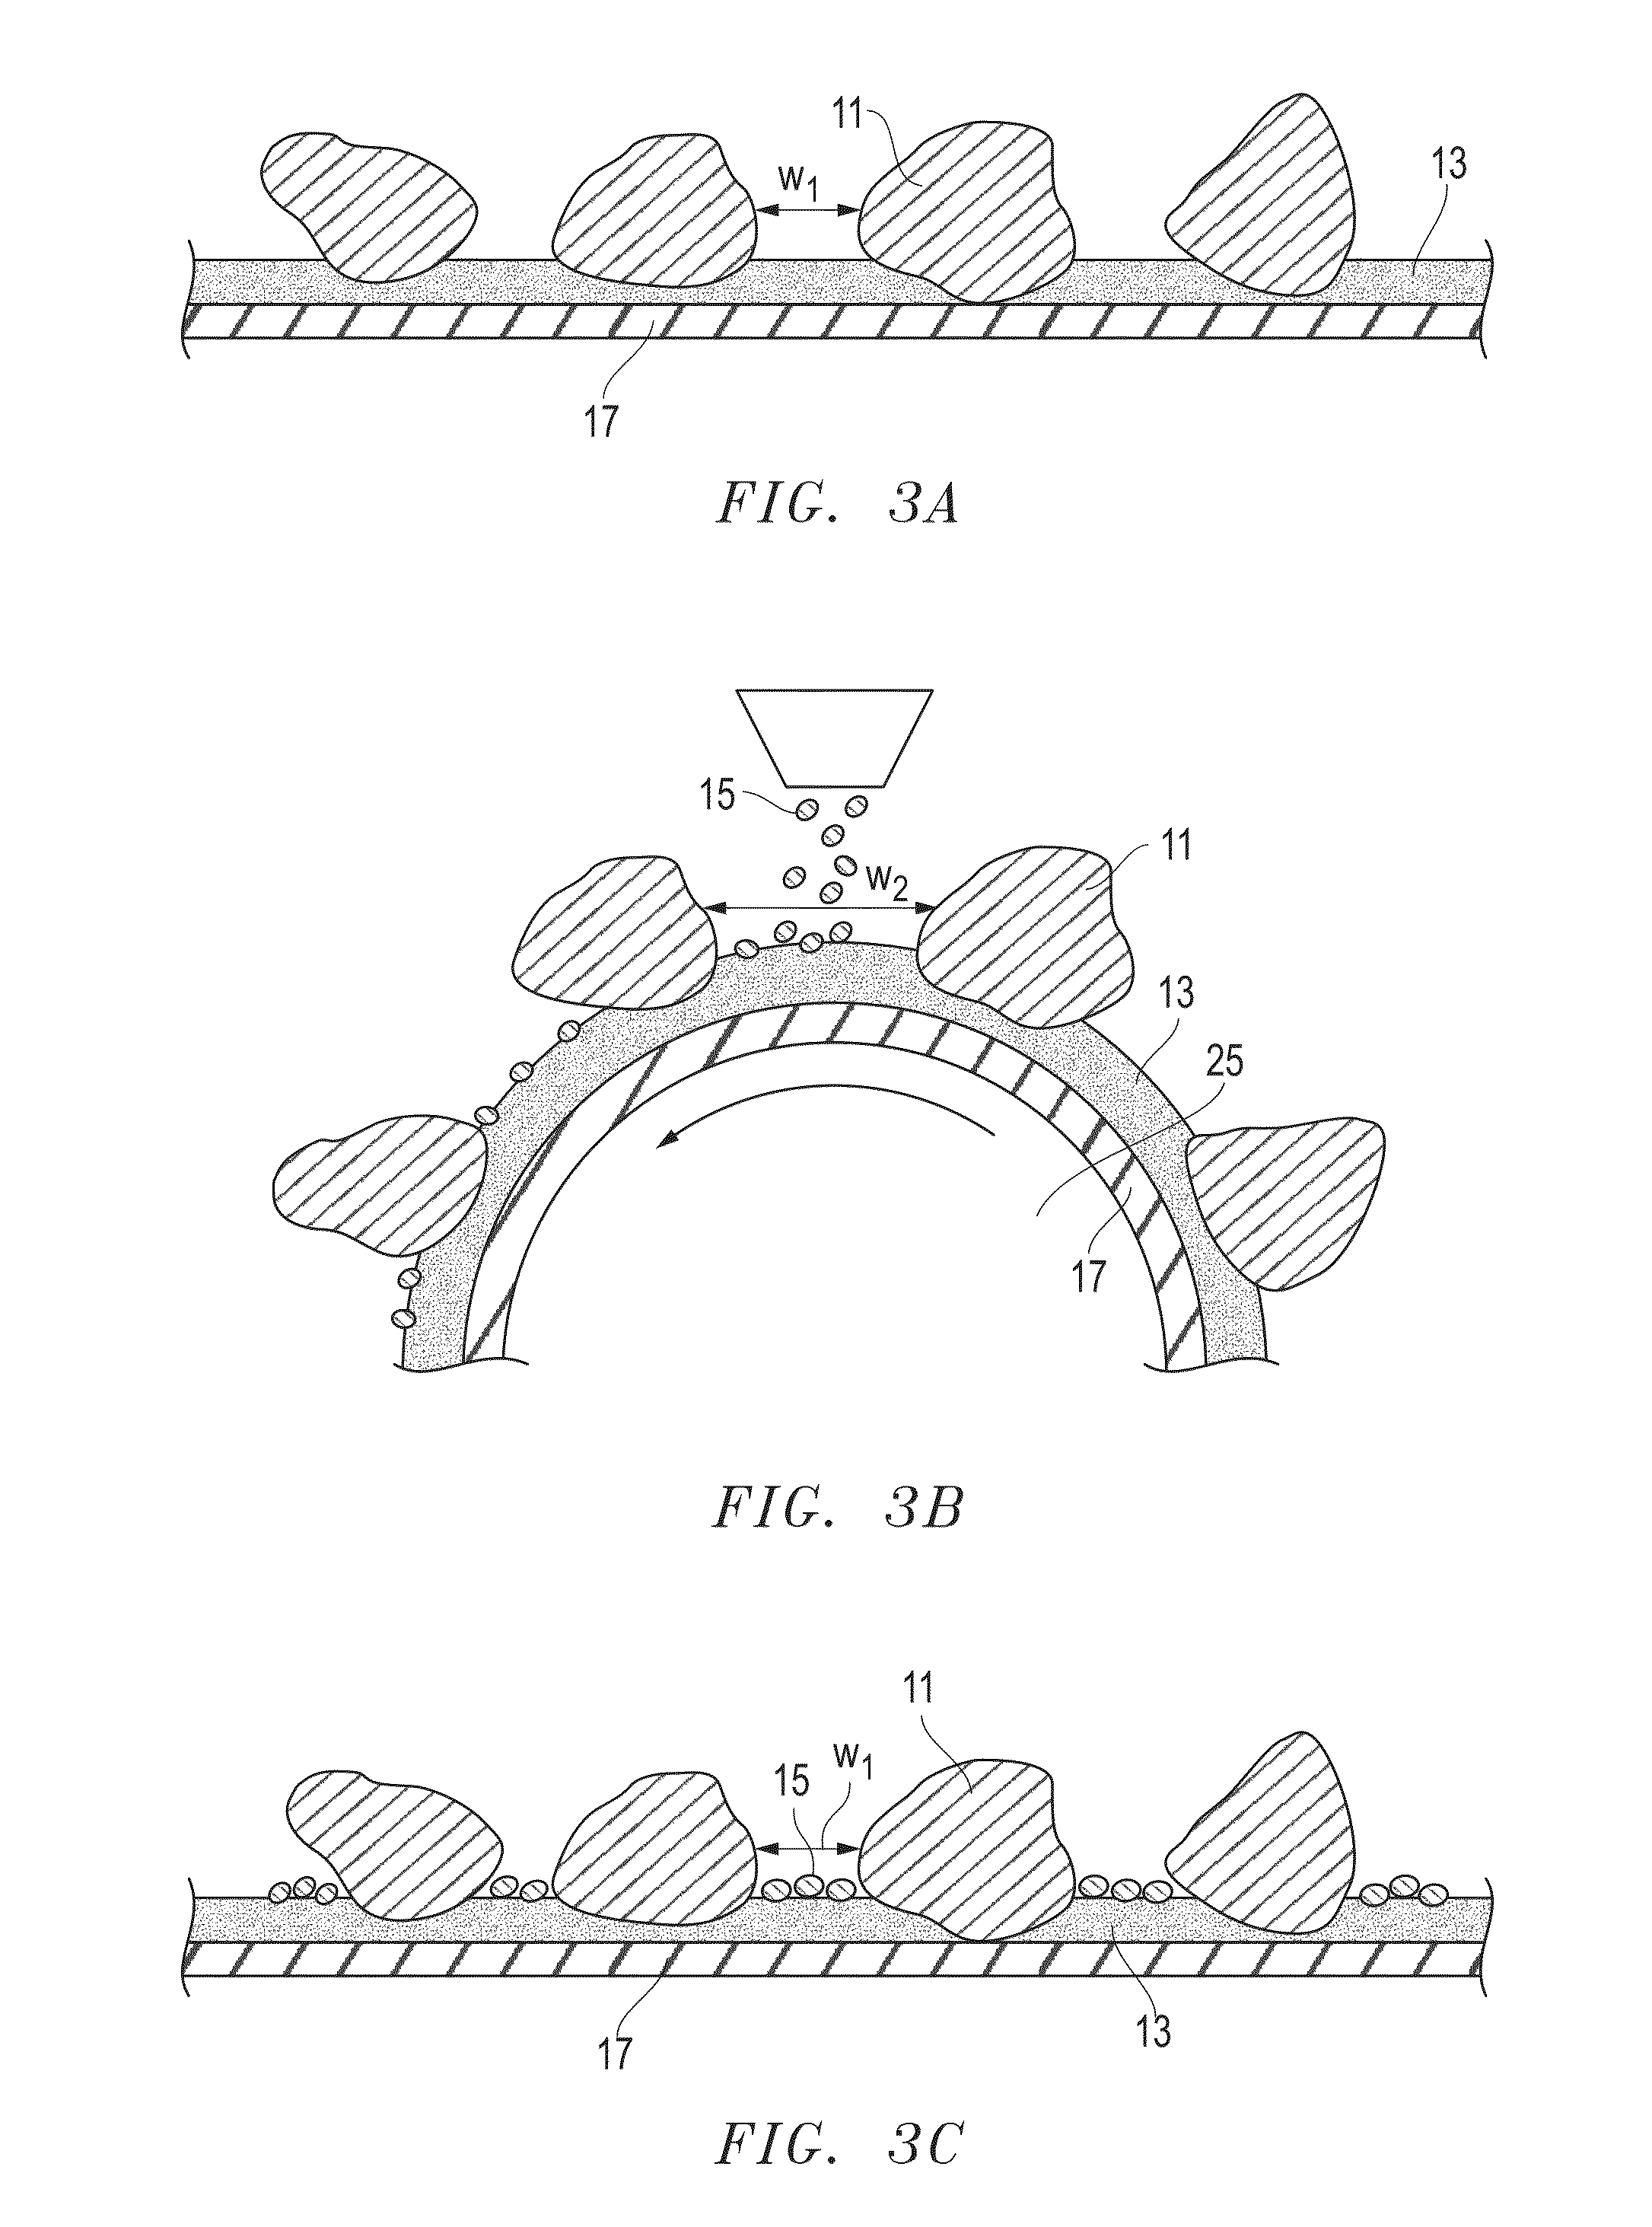 System, method and apparatus for increasing surface solar reflectance of roofing